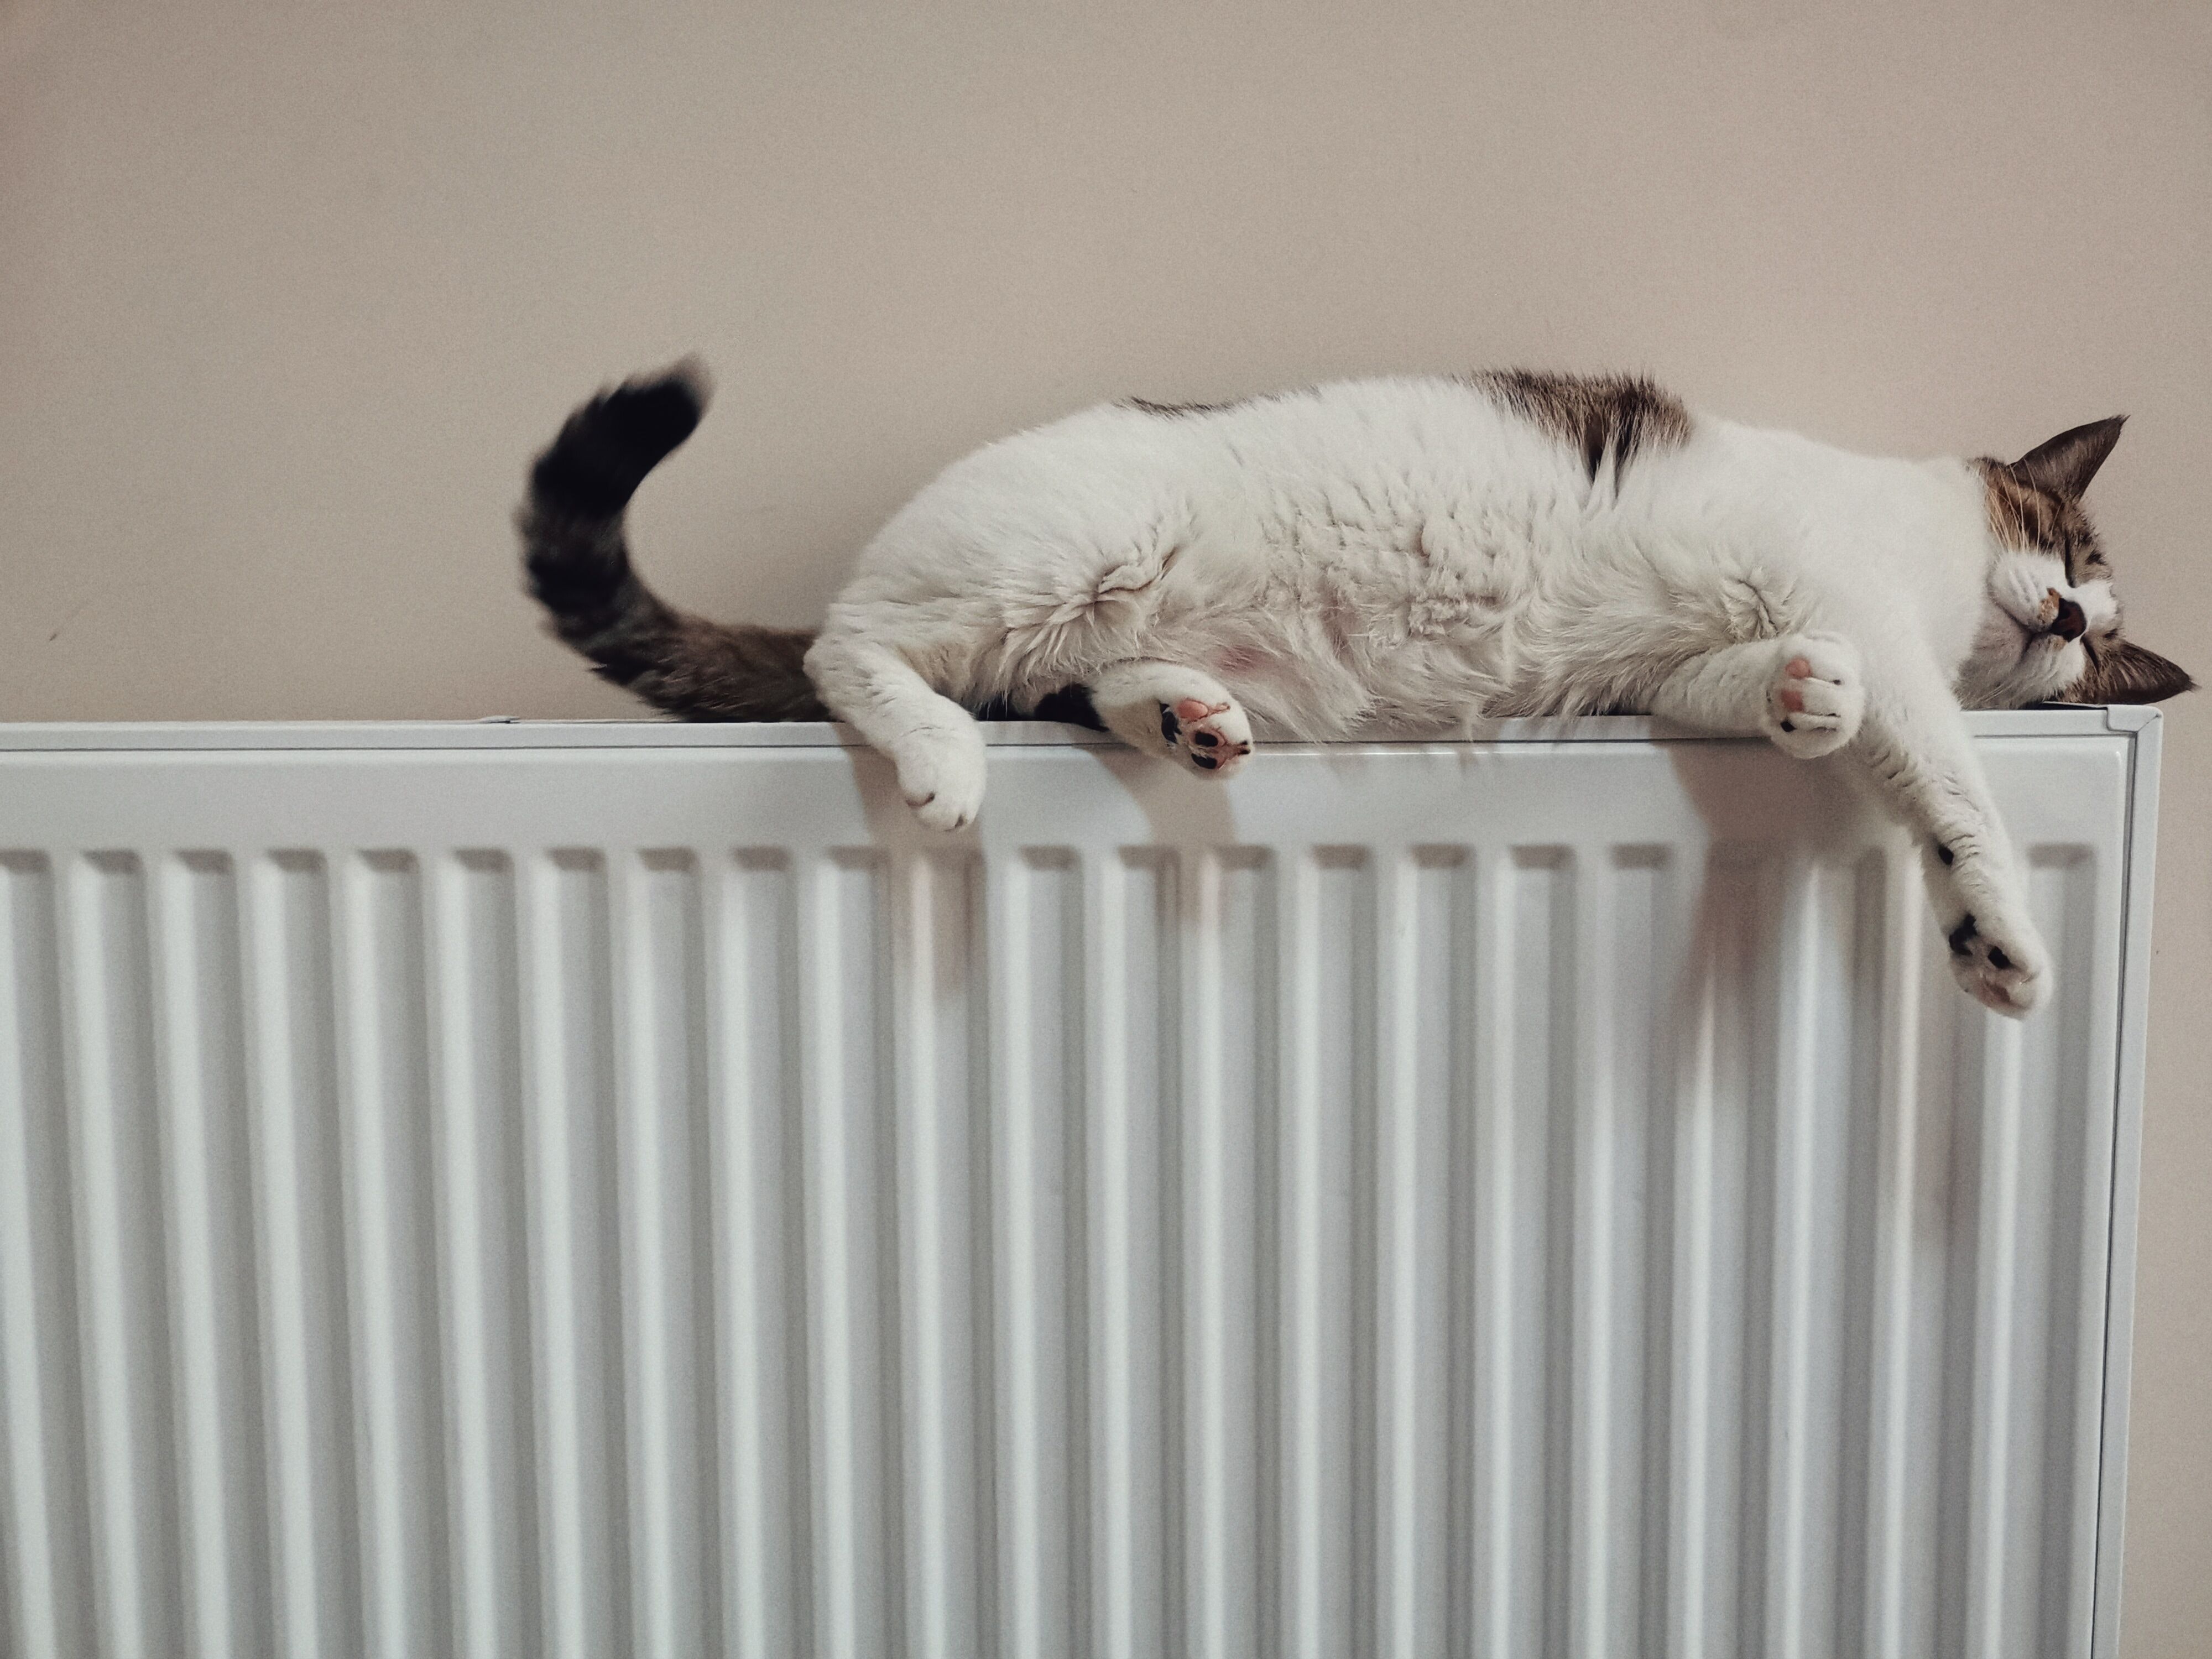 cat resting on a warm radiator with central heating on